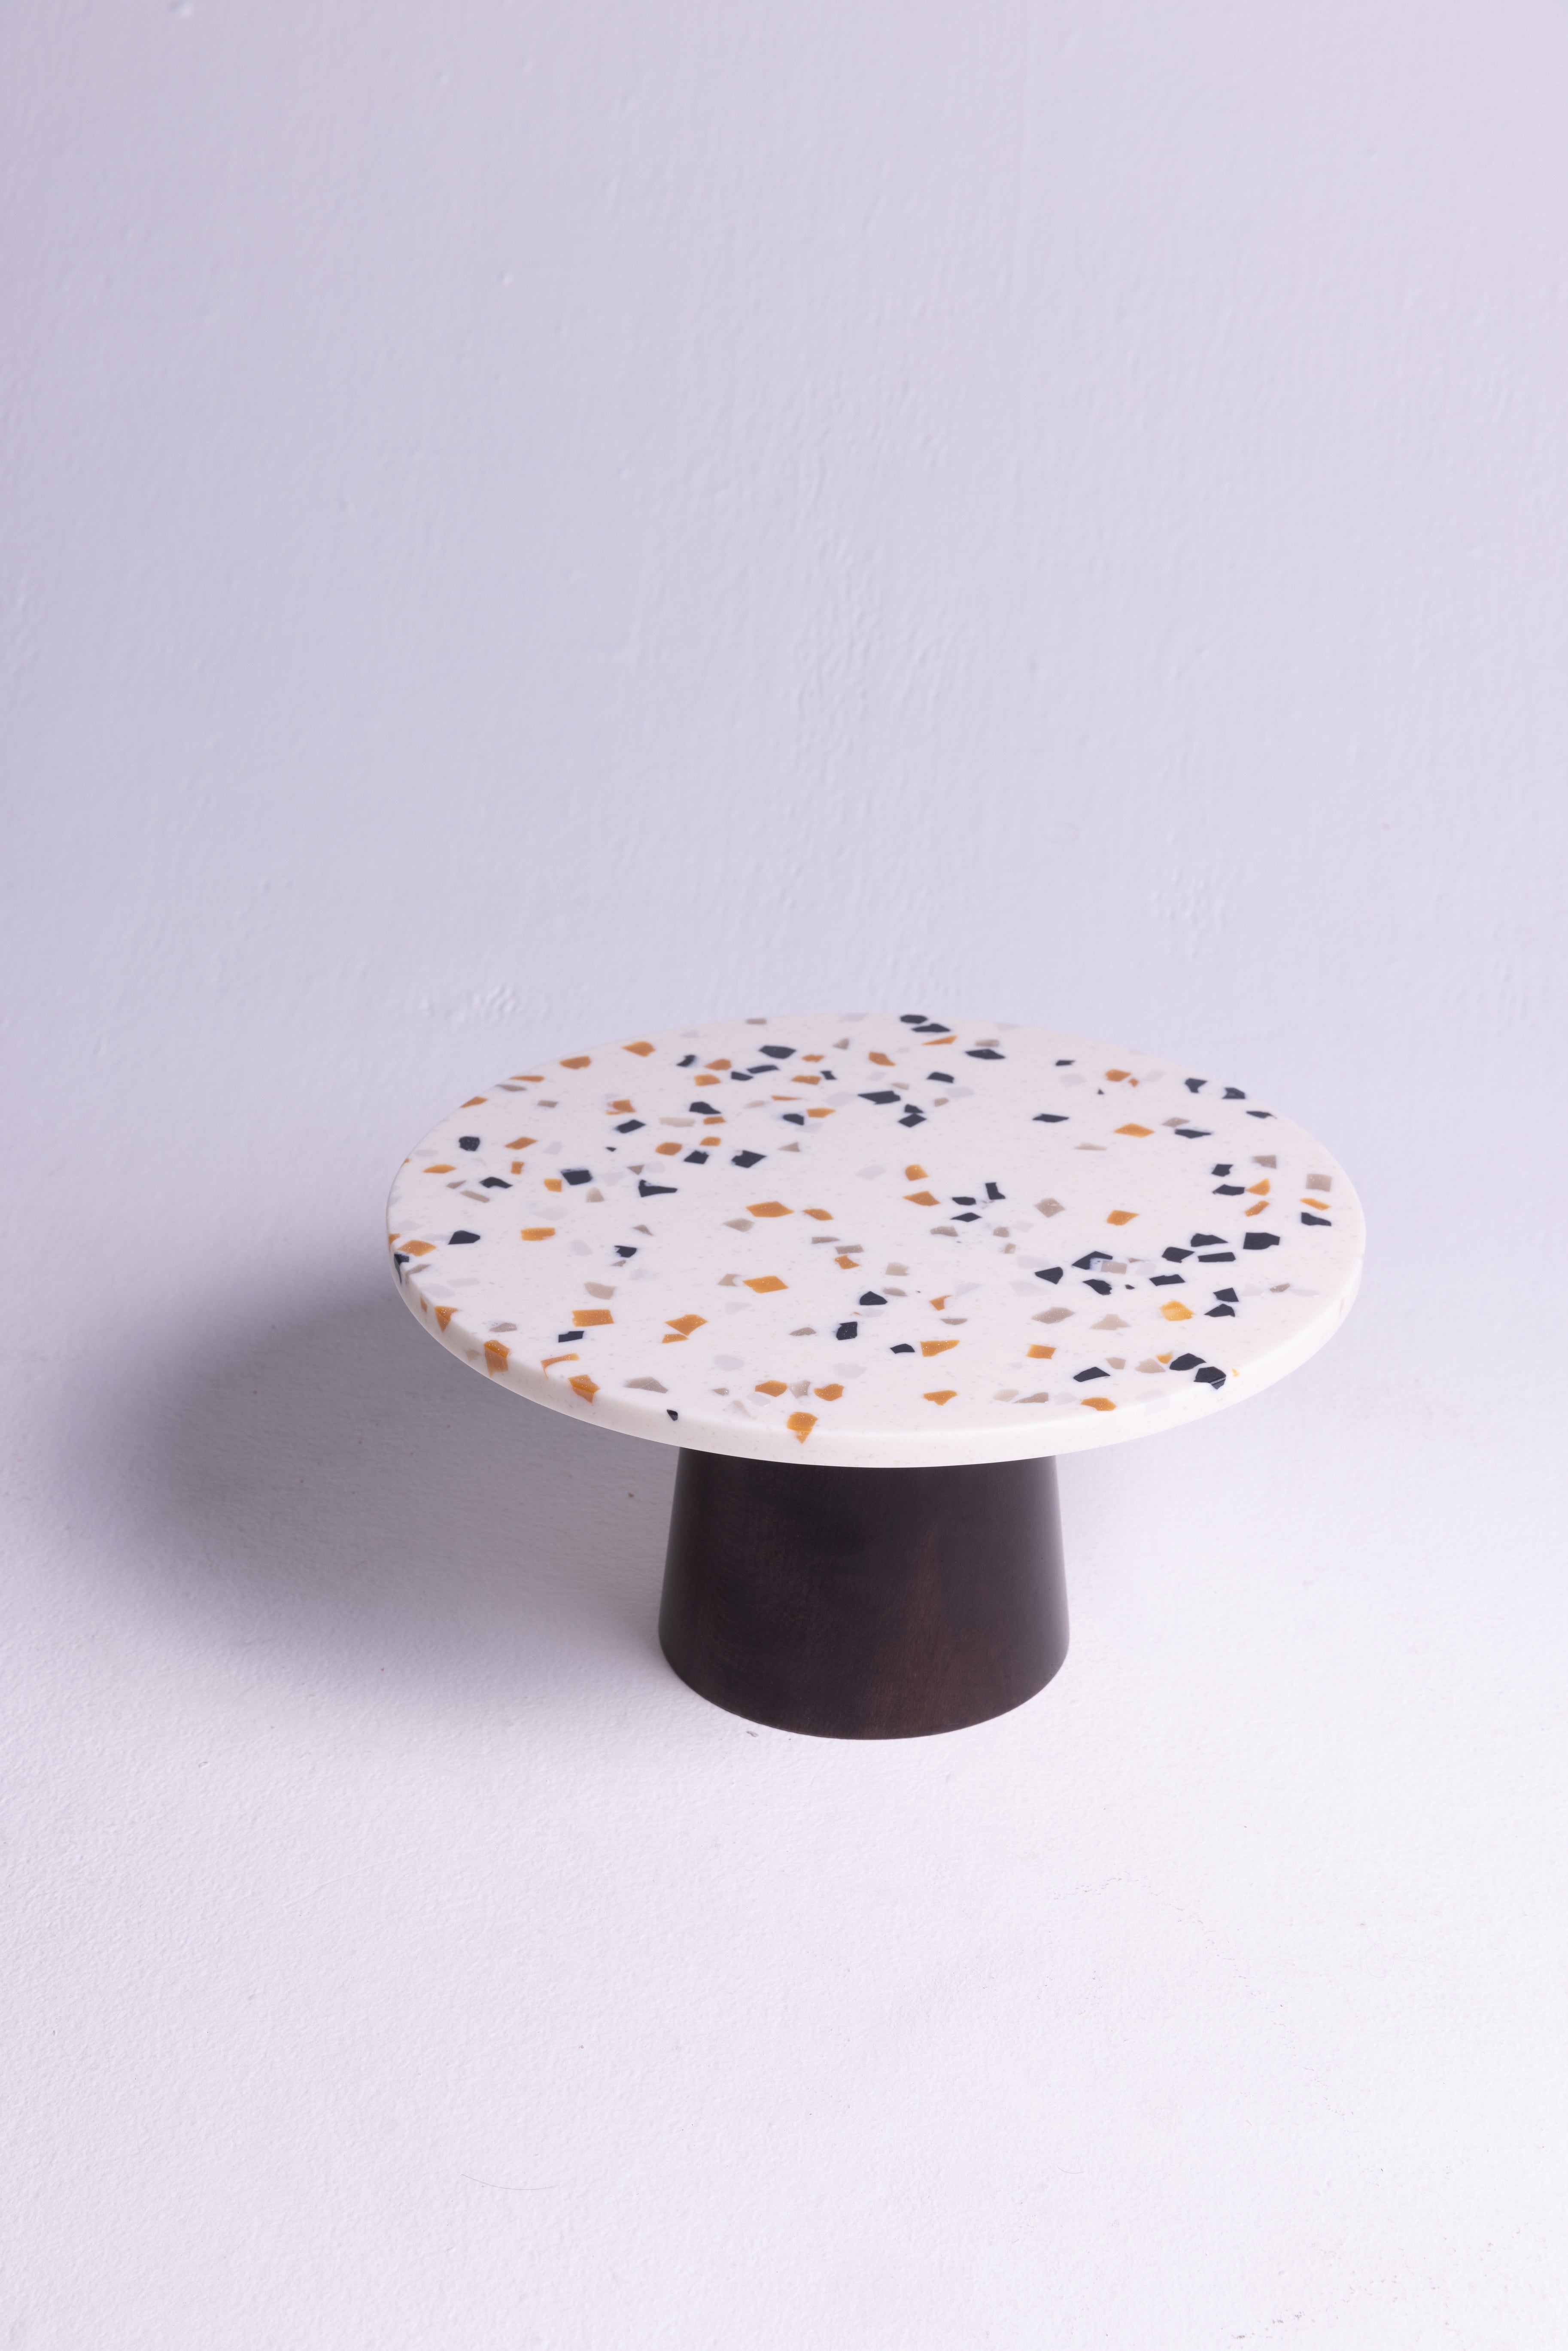 Corian Terrazzo Cake stand with wooden base